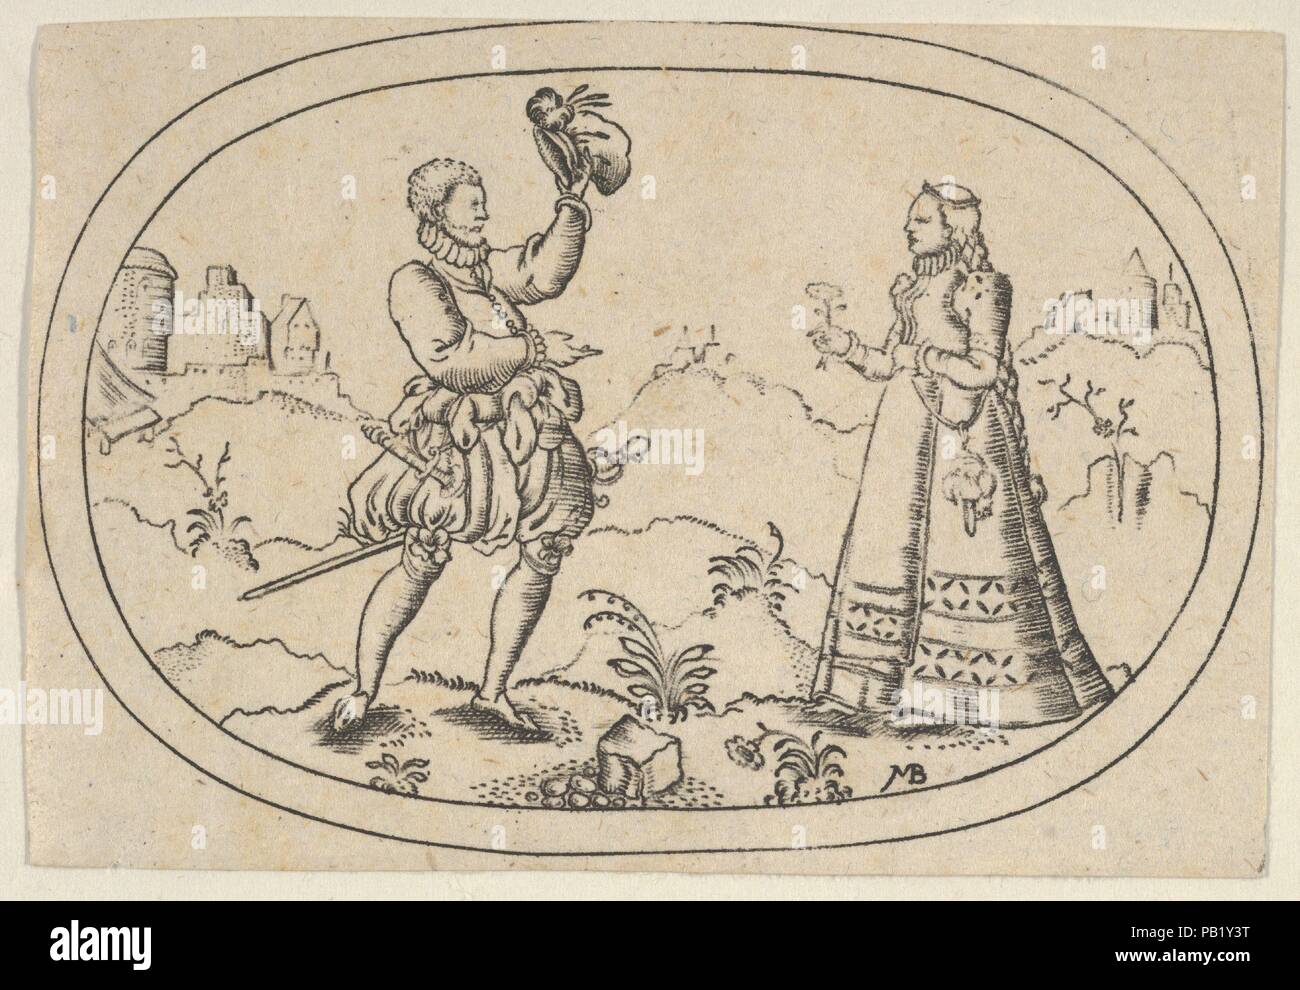 A Gentleman Greets a Lady, from Das Bossenbüchlein. Artist: Mathais Beitler (German, Ansbach, active ca. 1582-1616). Dimensions: Sheet: 2 1/4 × 3 3/8 in. (5.7 × 8.5 cm). Publisher: Stephan Herman (active 1568-96). Series/Portfolio: Das Bossenbüchlein. Date: ca. 1582.  A gentleman, at left, greets a lady, at right, who hands him a flower. Buildings seen in the distance at left and right. From a set of 12 plates of vessel designs. Museum: Metropolitan Museum of Art, New York, USA. Stock Photo